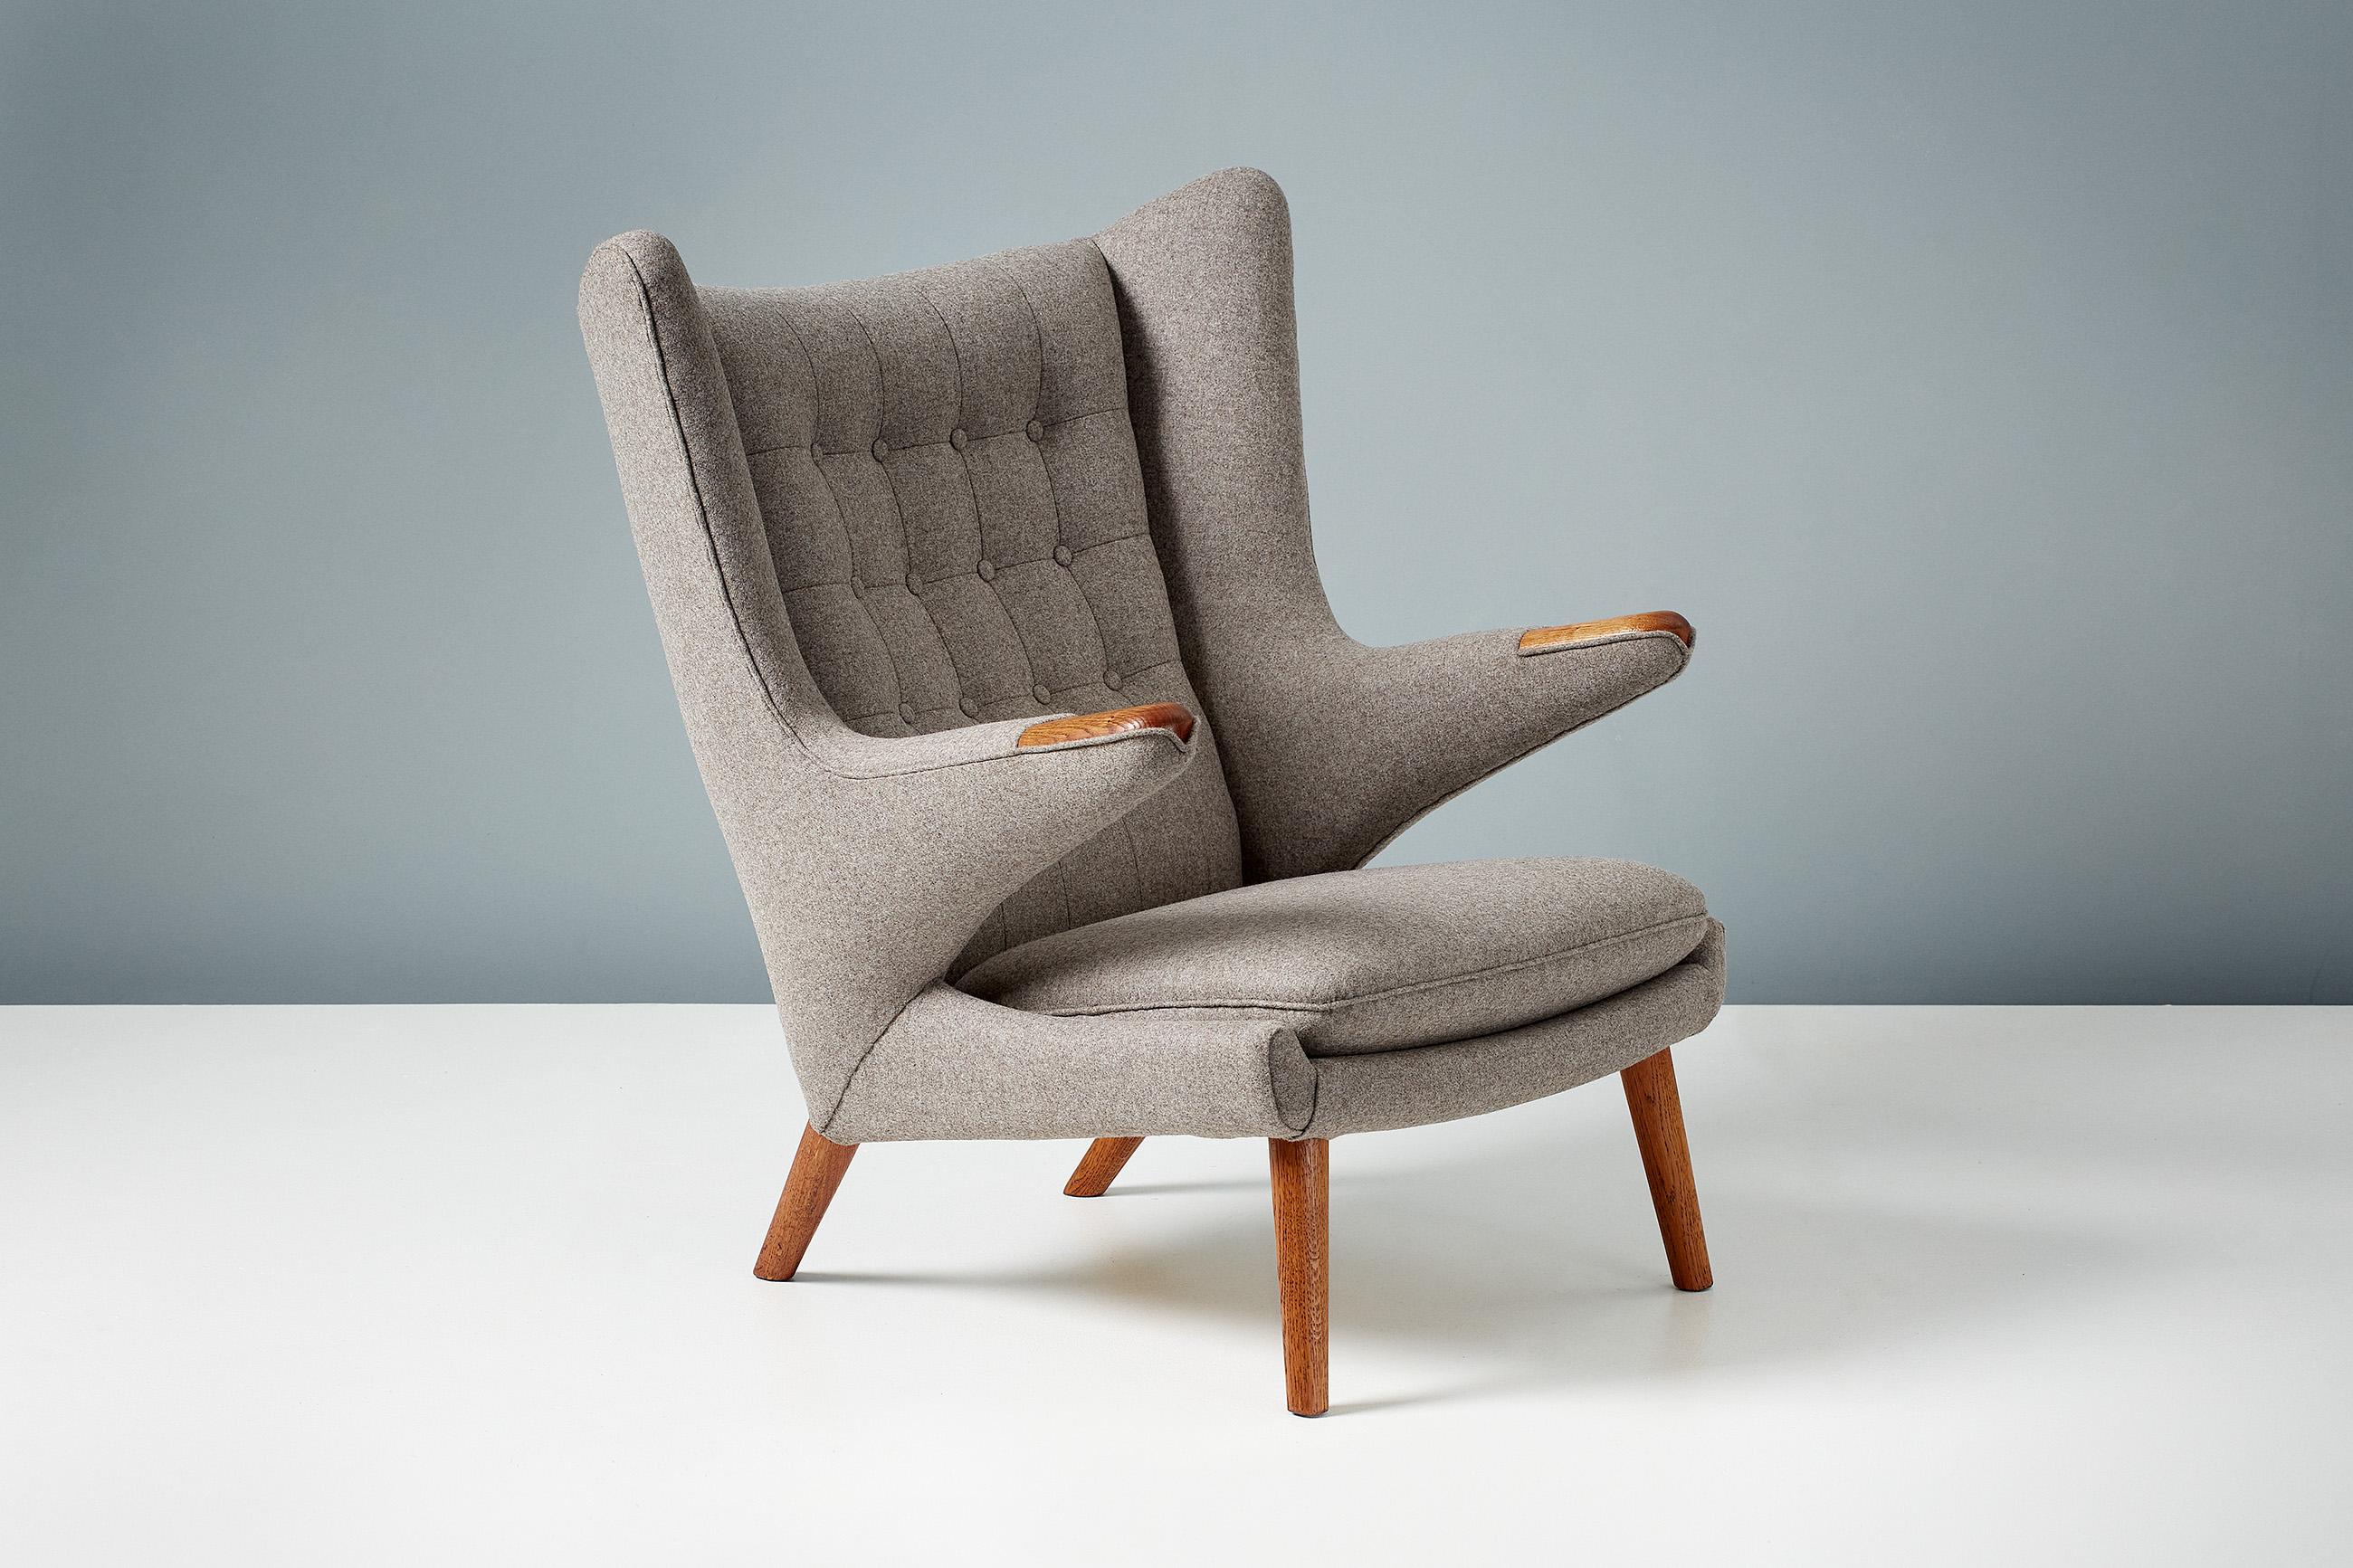 Hans J. Wegner

AP-19 Papa Bear chair, 1953

Vintage, original 1950s production of one of Danish master Hans Wegner's most iconic designs. The Papa Bear is rightly considered one of the most important and desirable pieces of furniture of the